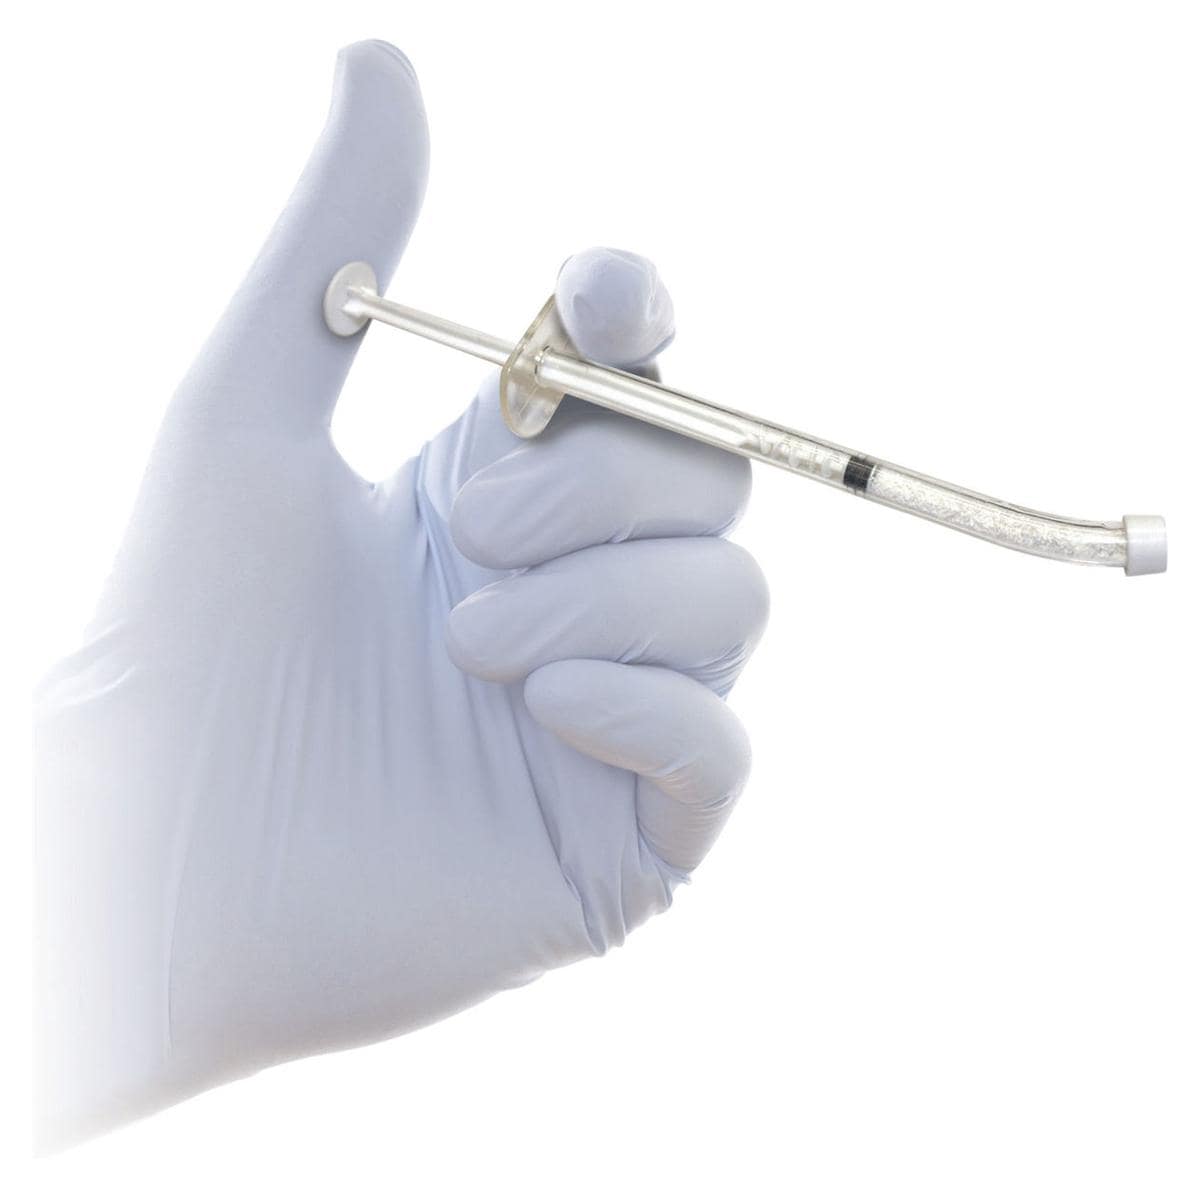 NuOss DS - direct delivery syringe - Cancellous 0.25 - 1.0 mm, 0,5 g